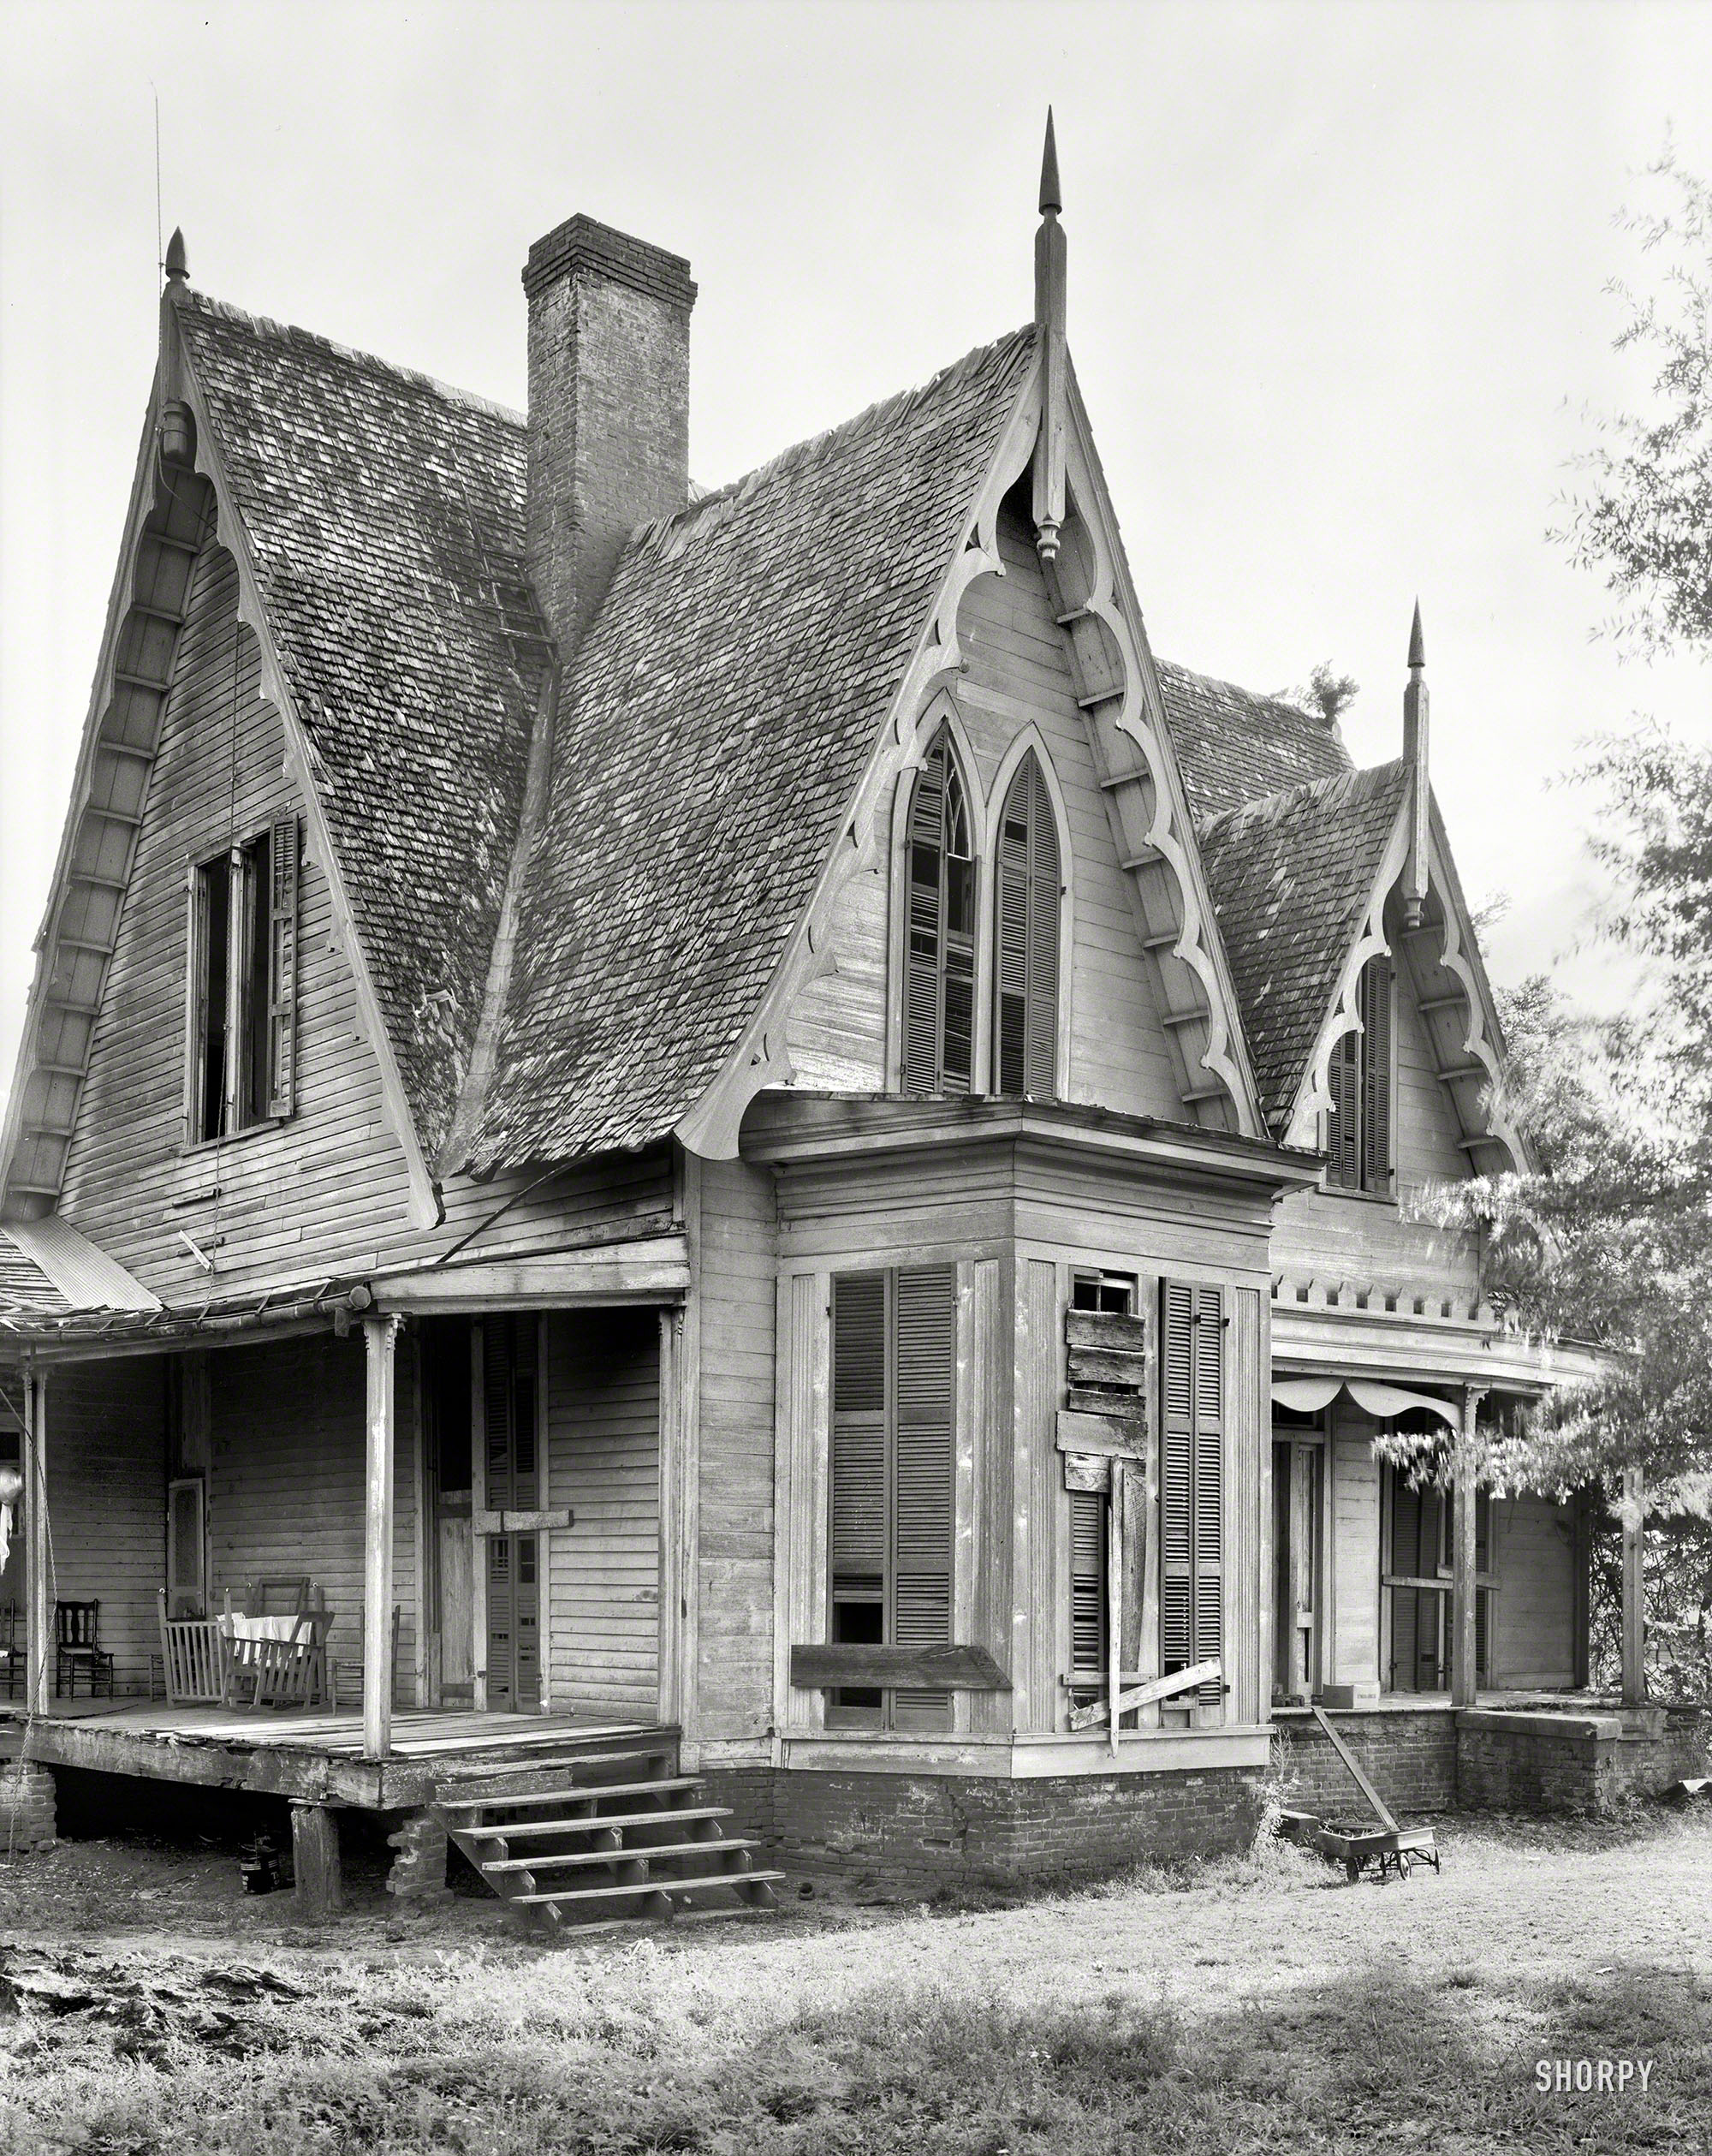 1939. "Knight House, Greensboro vicinity, Hale County, Alabama. Gothic Revival two-story frame built c. 1840." A little dilapidated, but it has good bones. Possibly under the porch. Photo by Frances Benjamin Johnston. View full size.